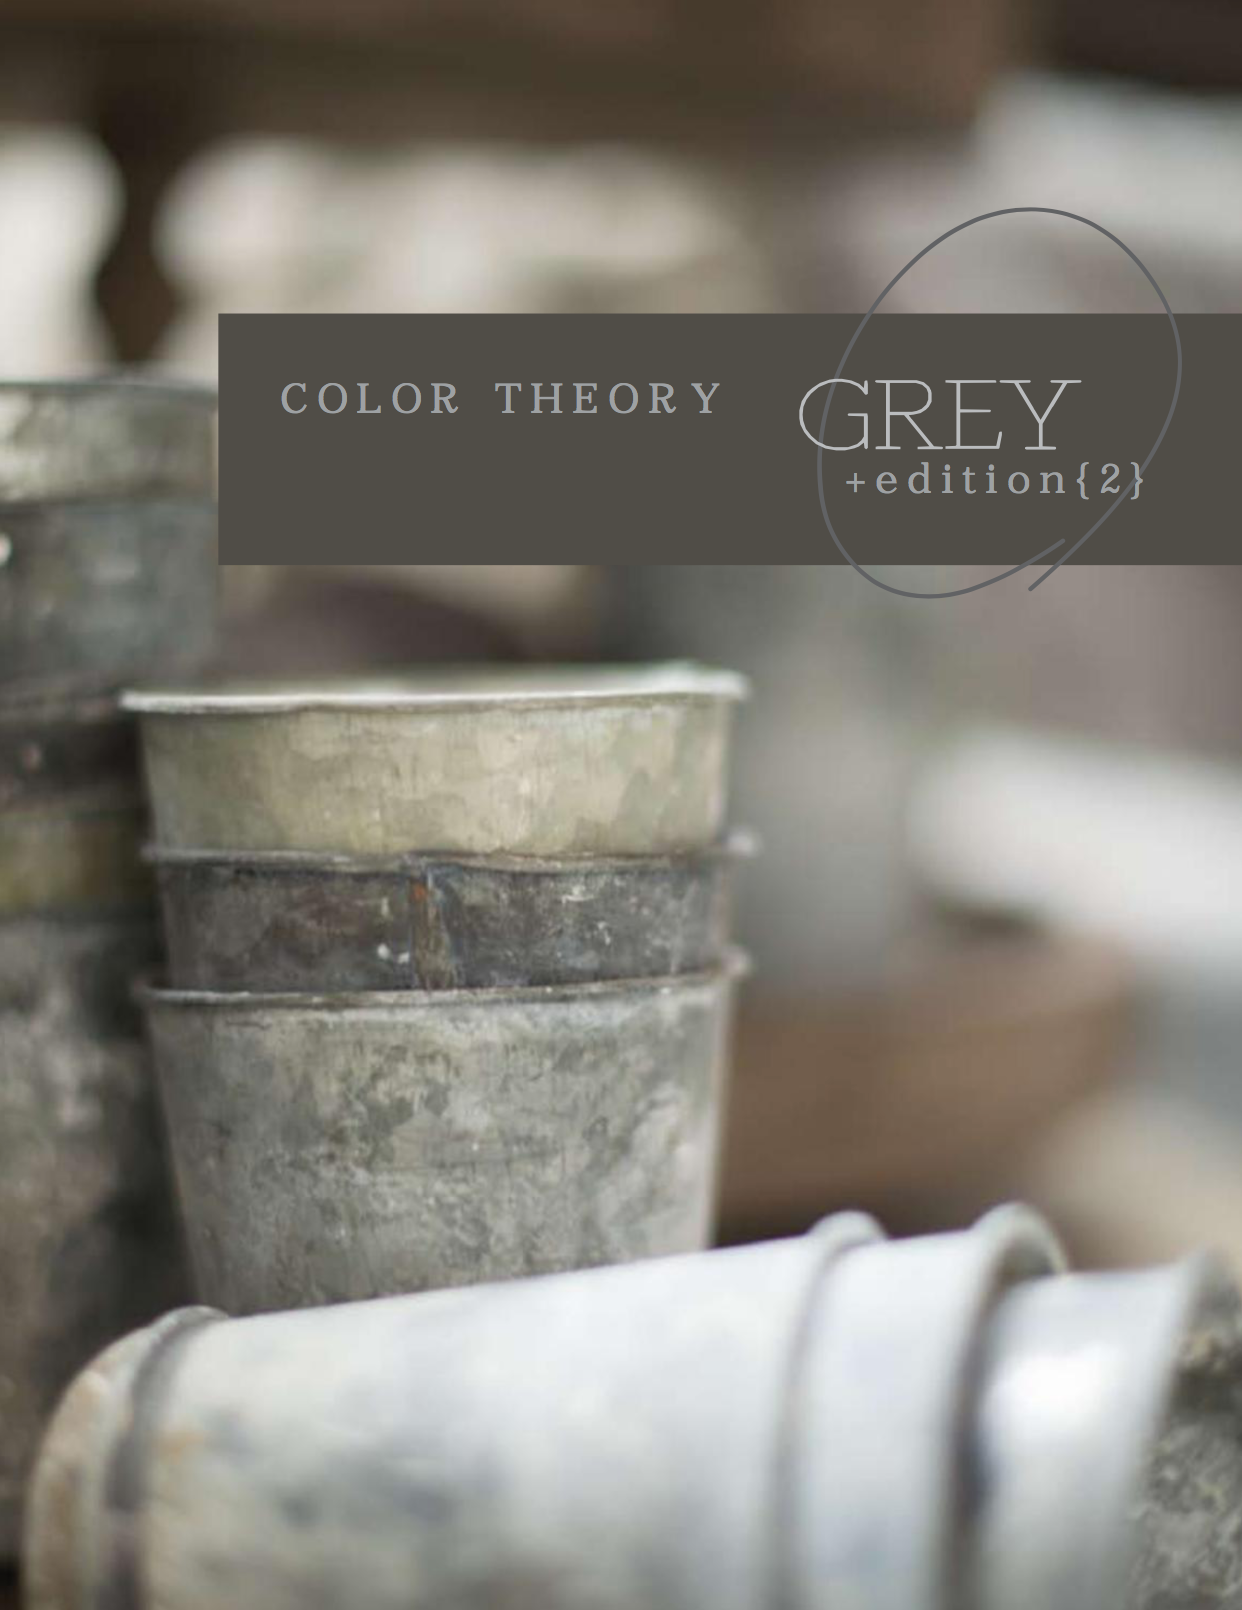 COLOR THEORY // GREY